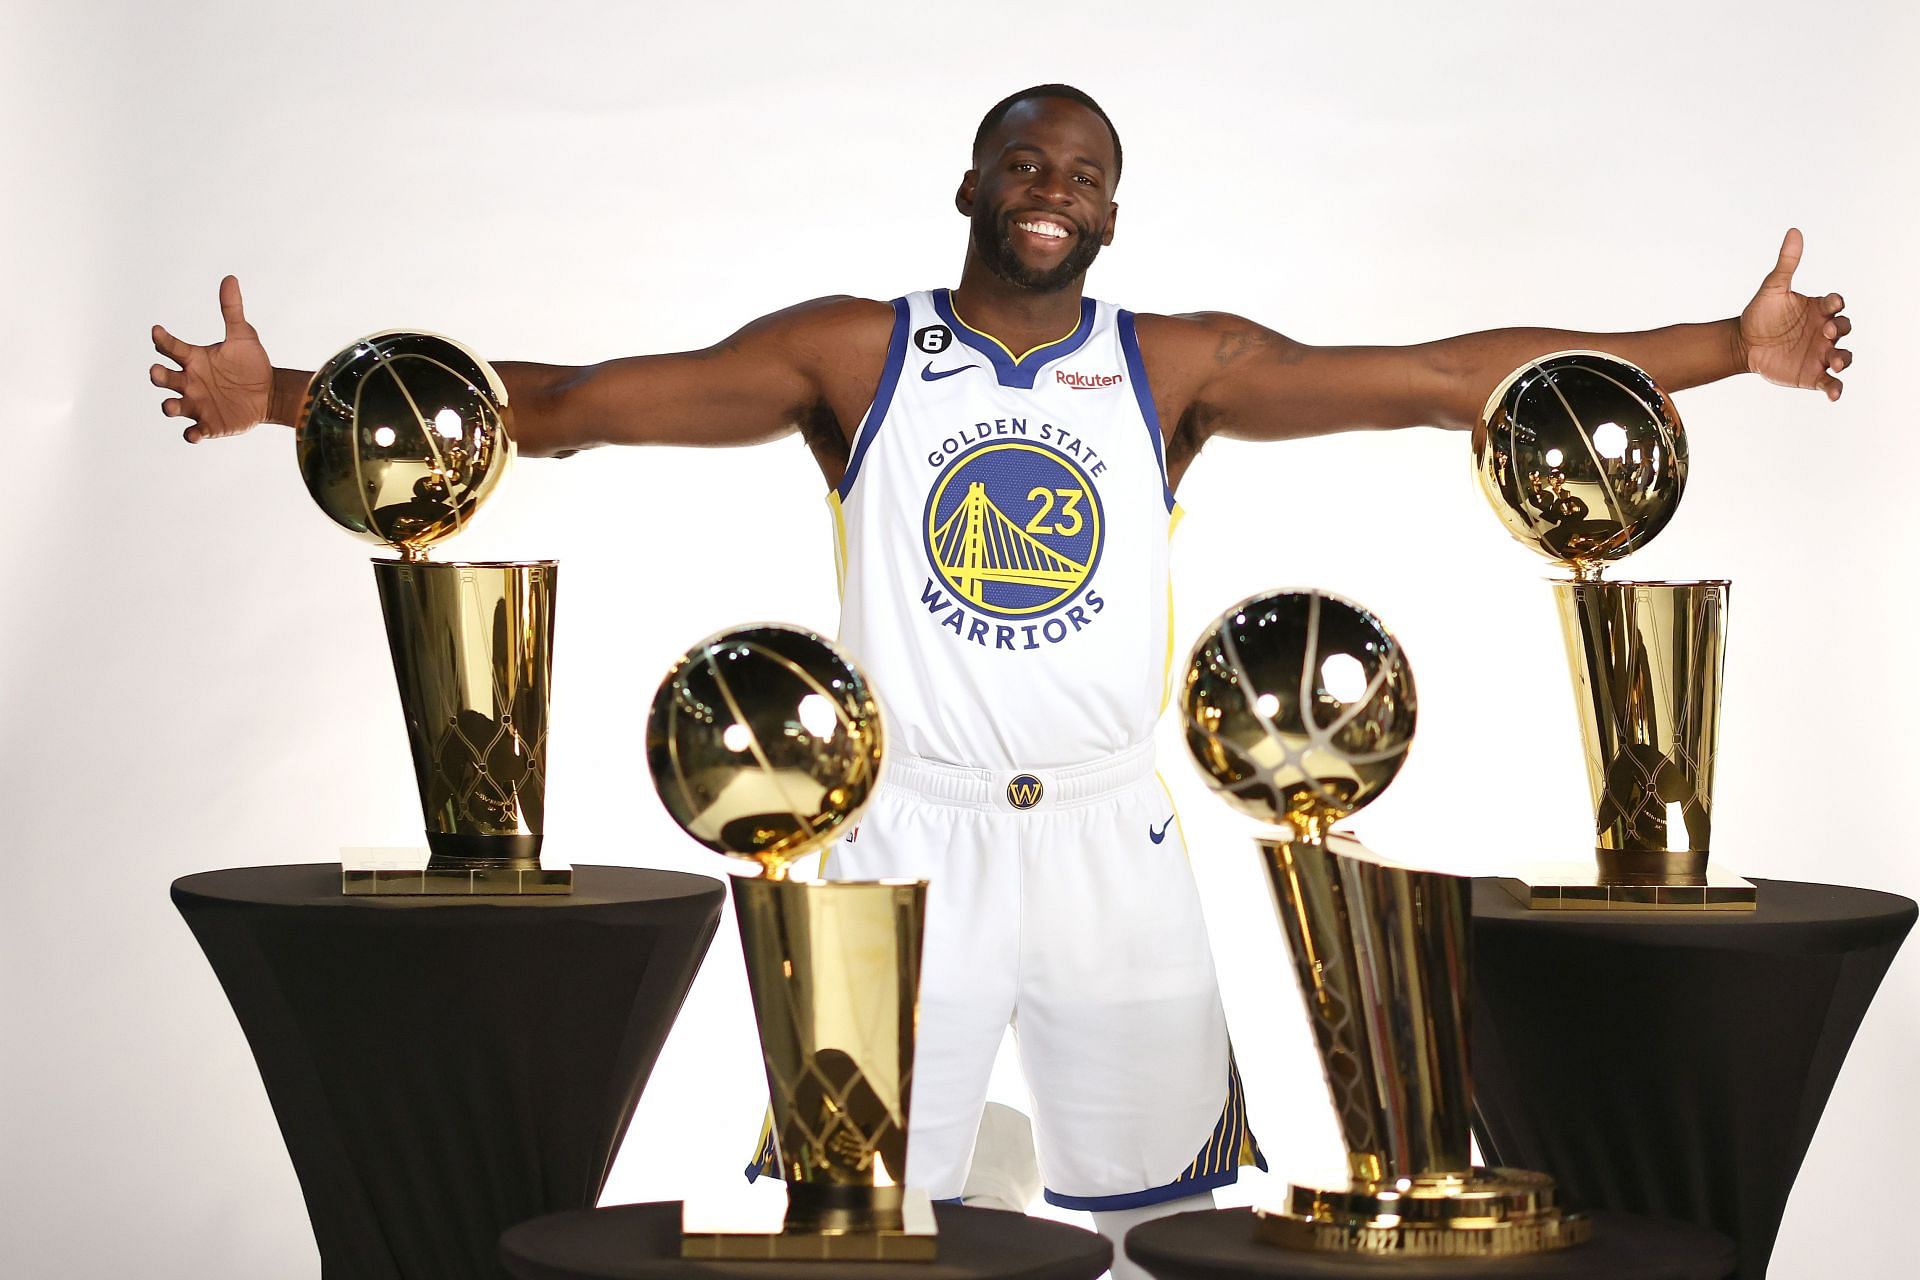 For Draymond Green, Watch Collecting Is a Competition